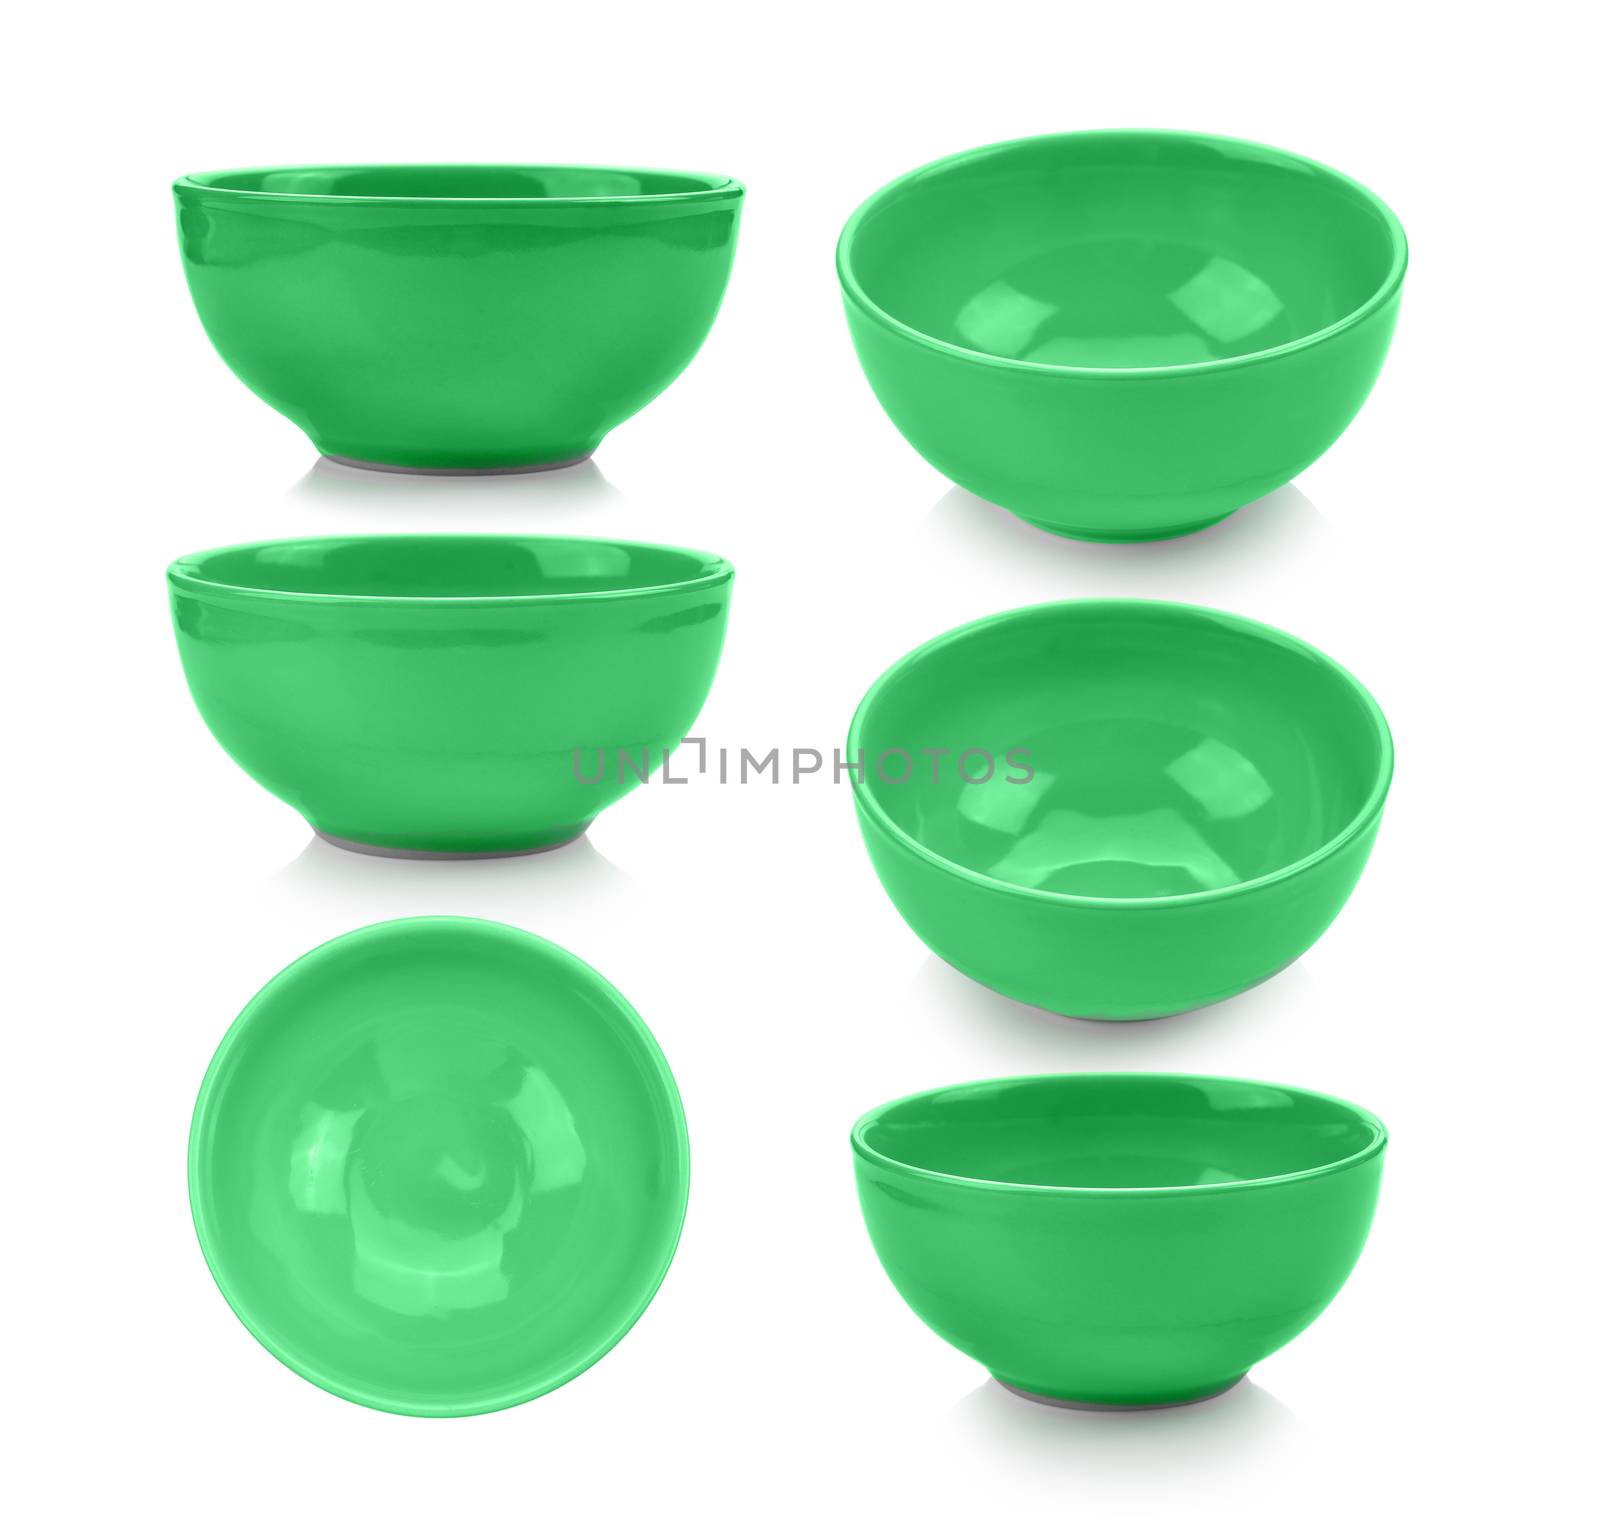 green bowl on white background by sommai